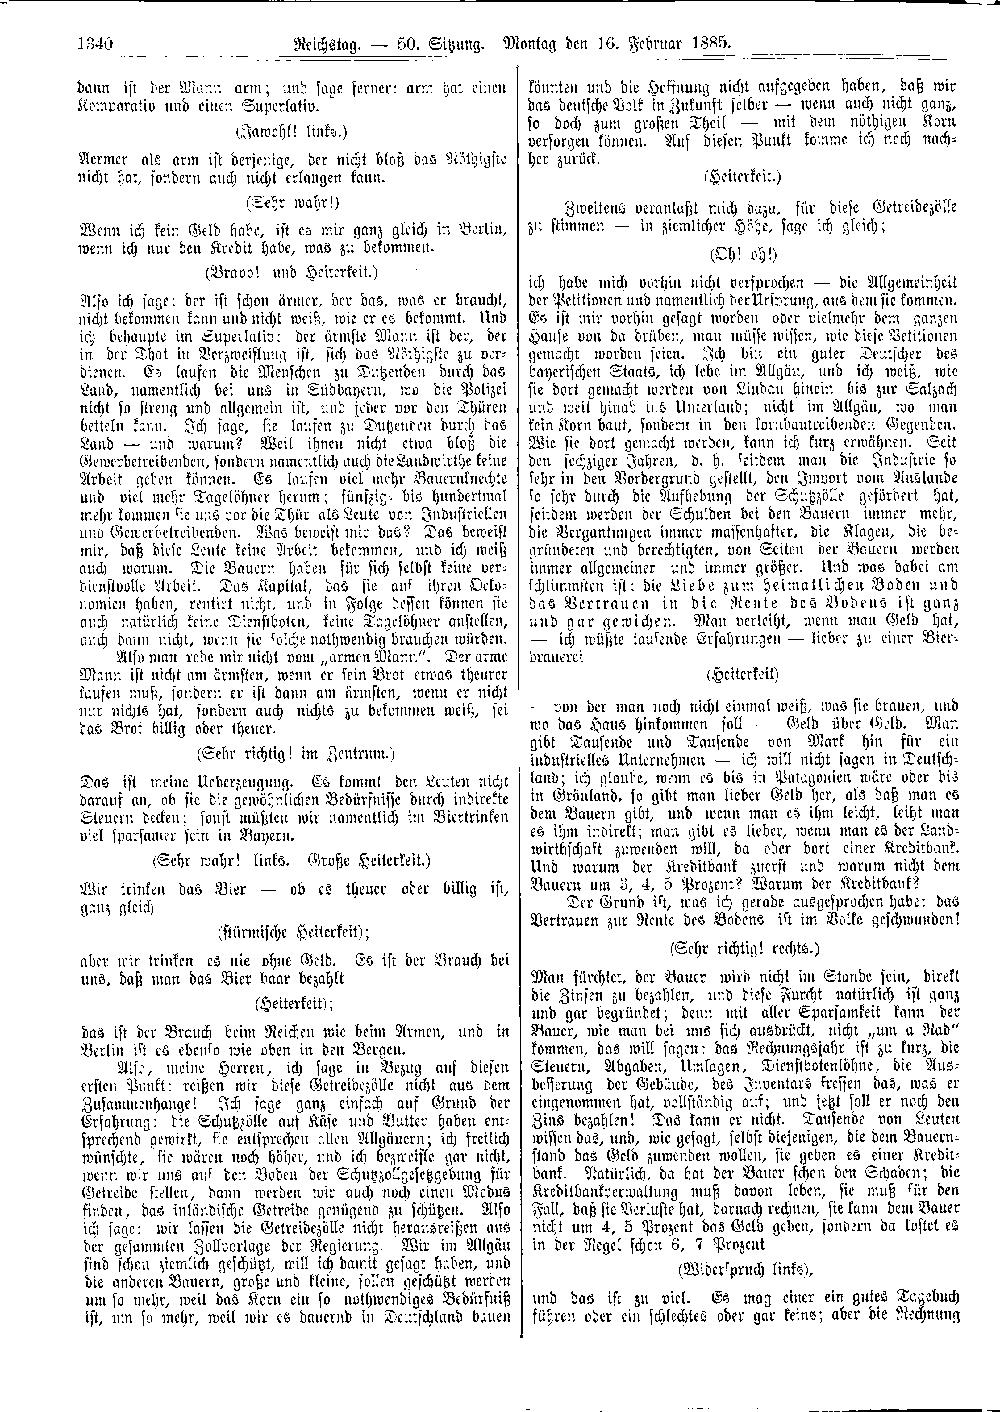 Scan of page 1340